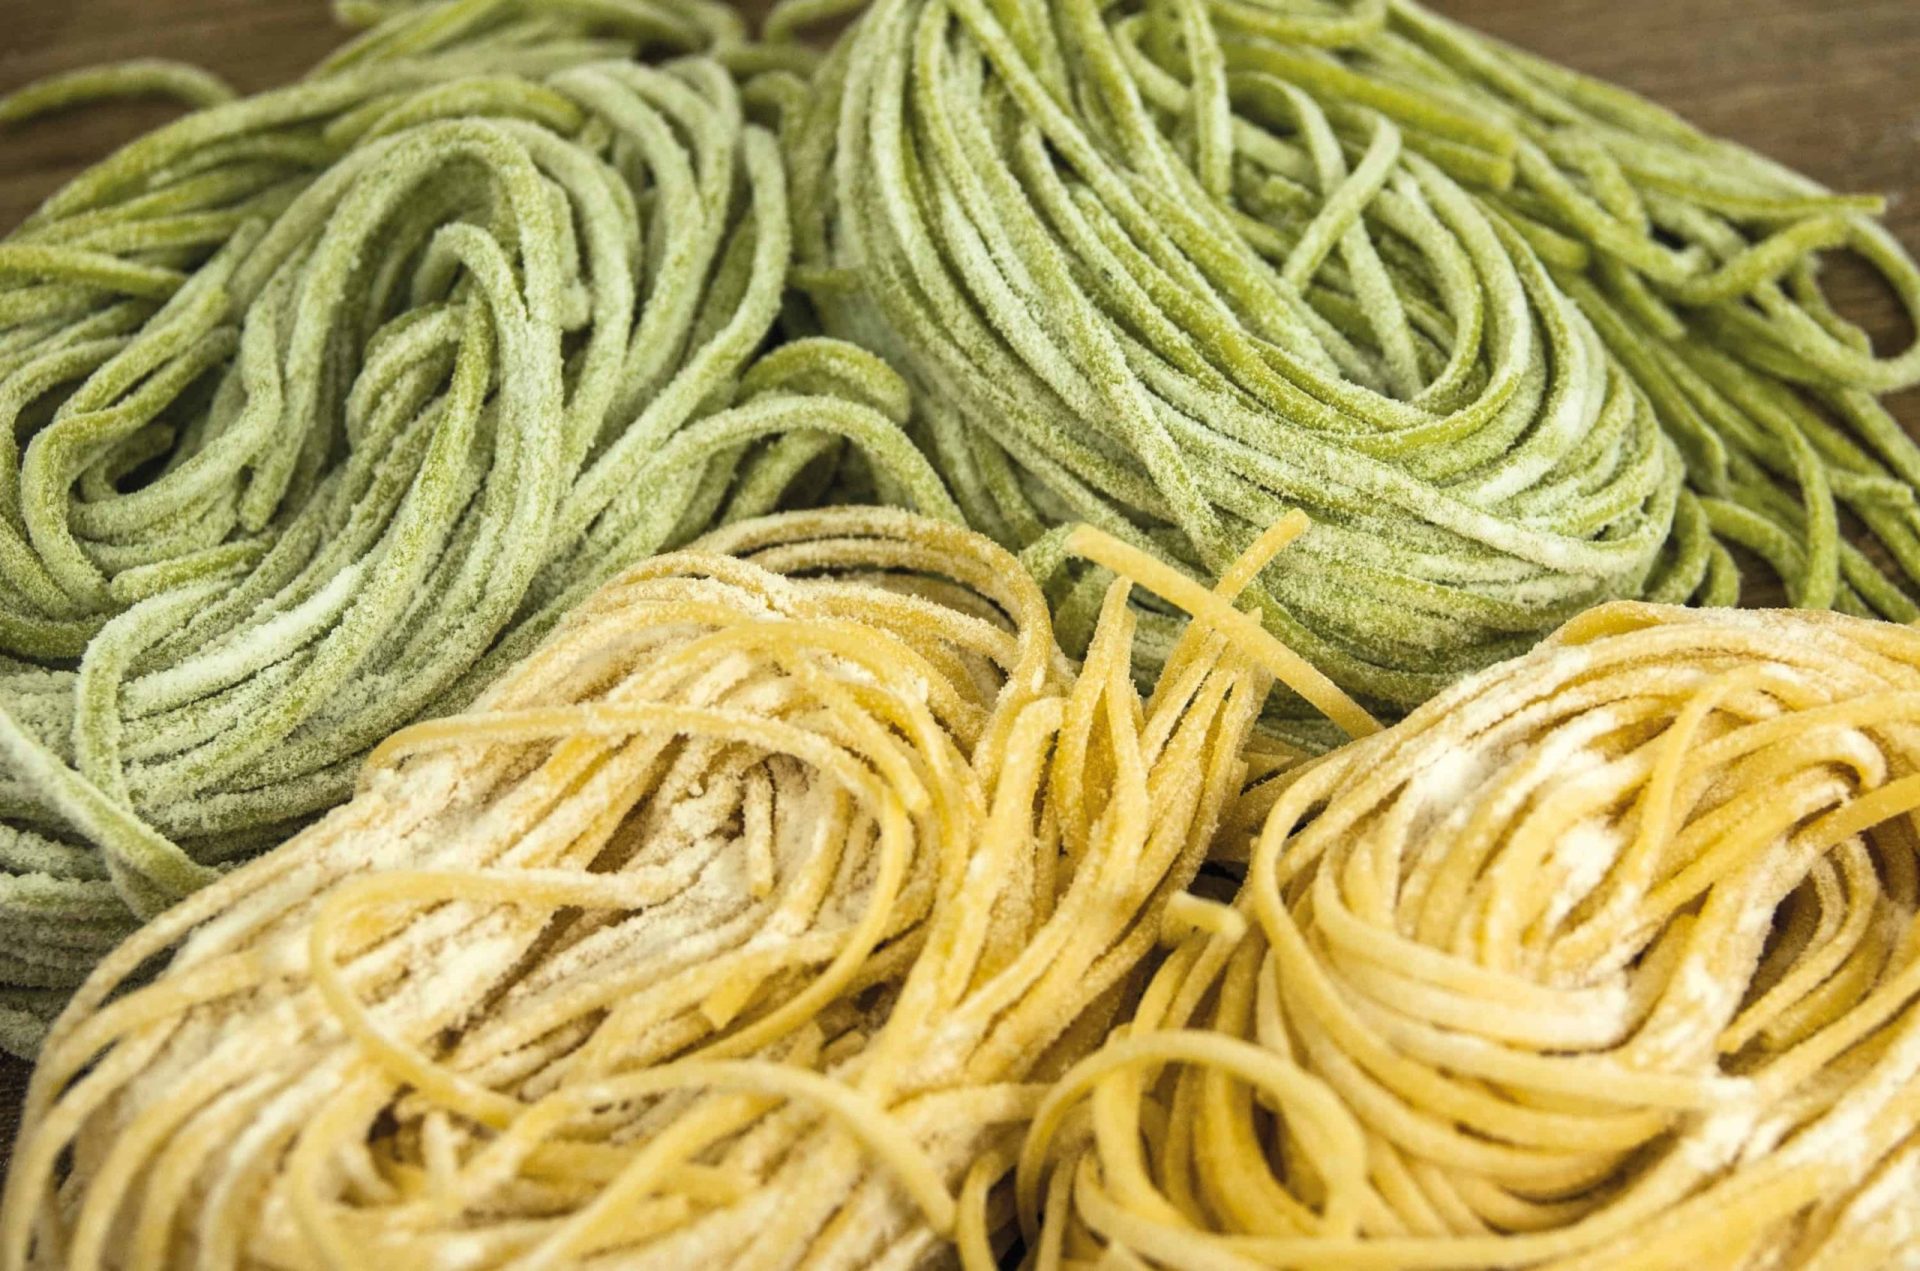 dried pasta noodles in green and yellow color